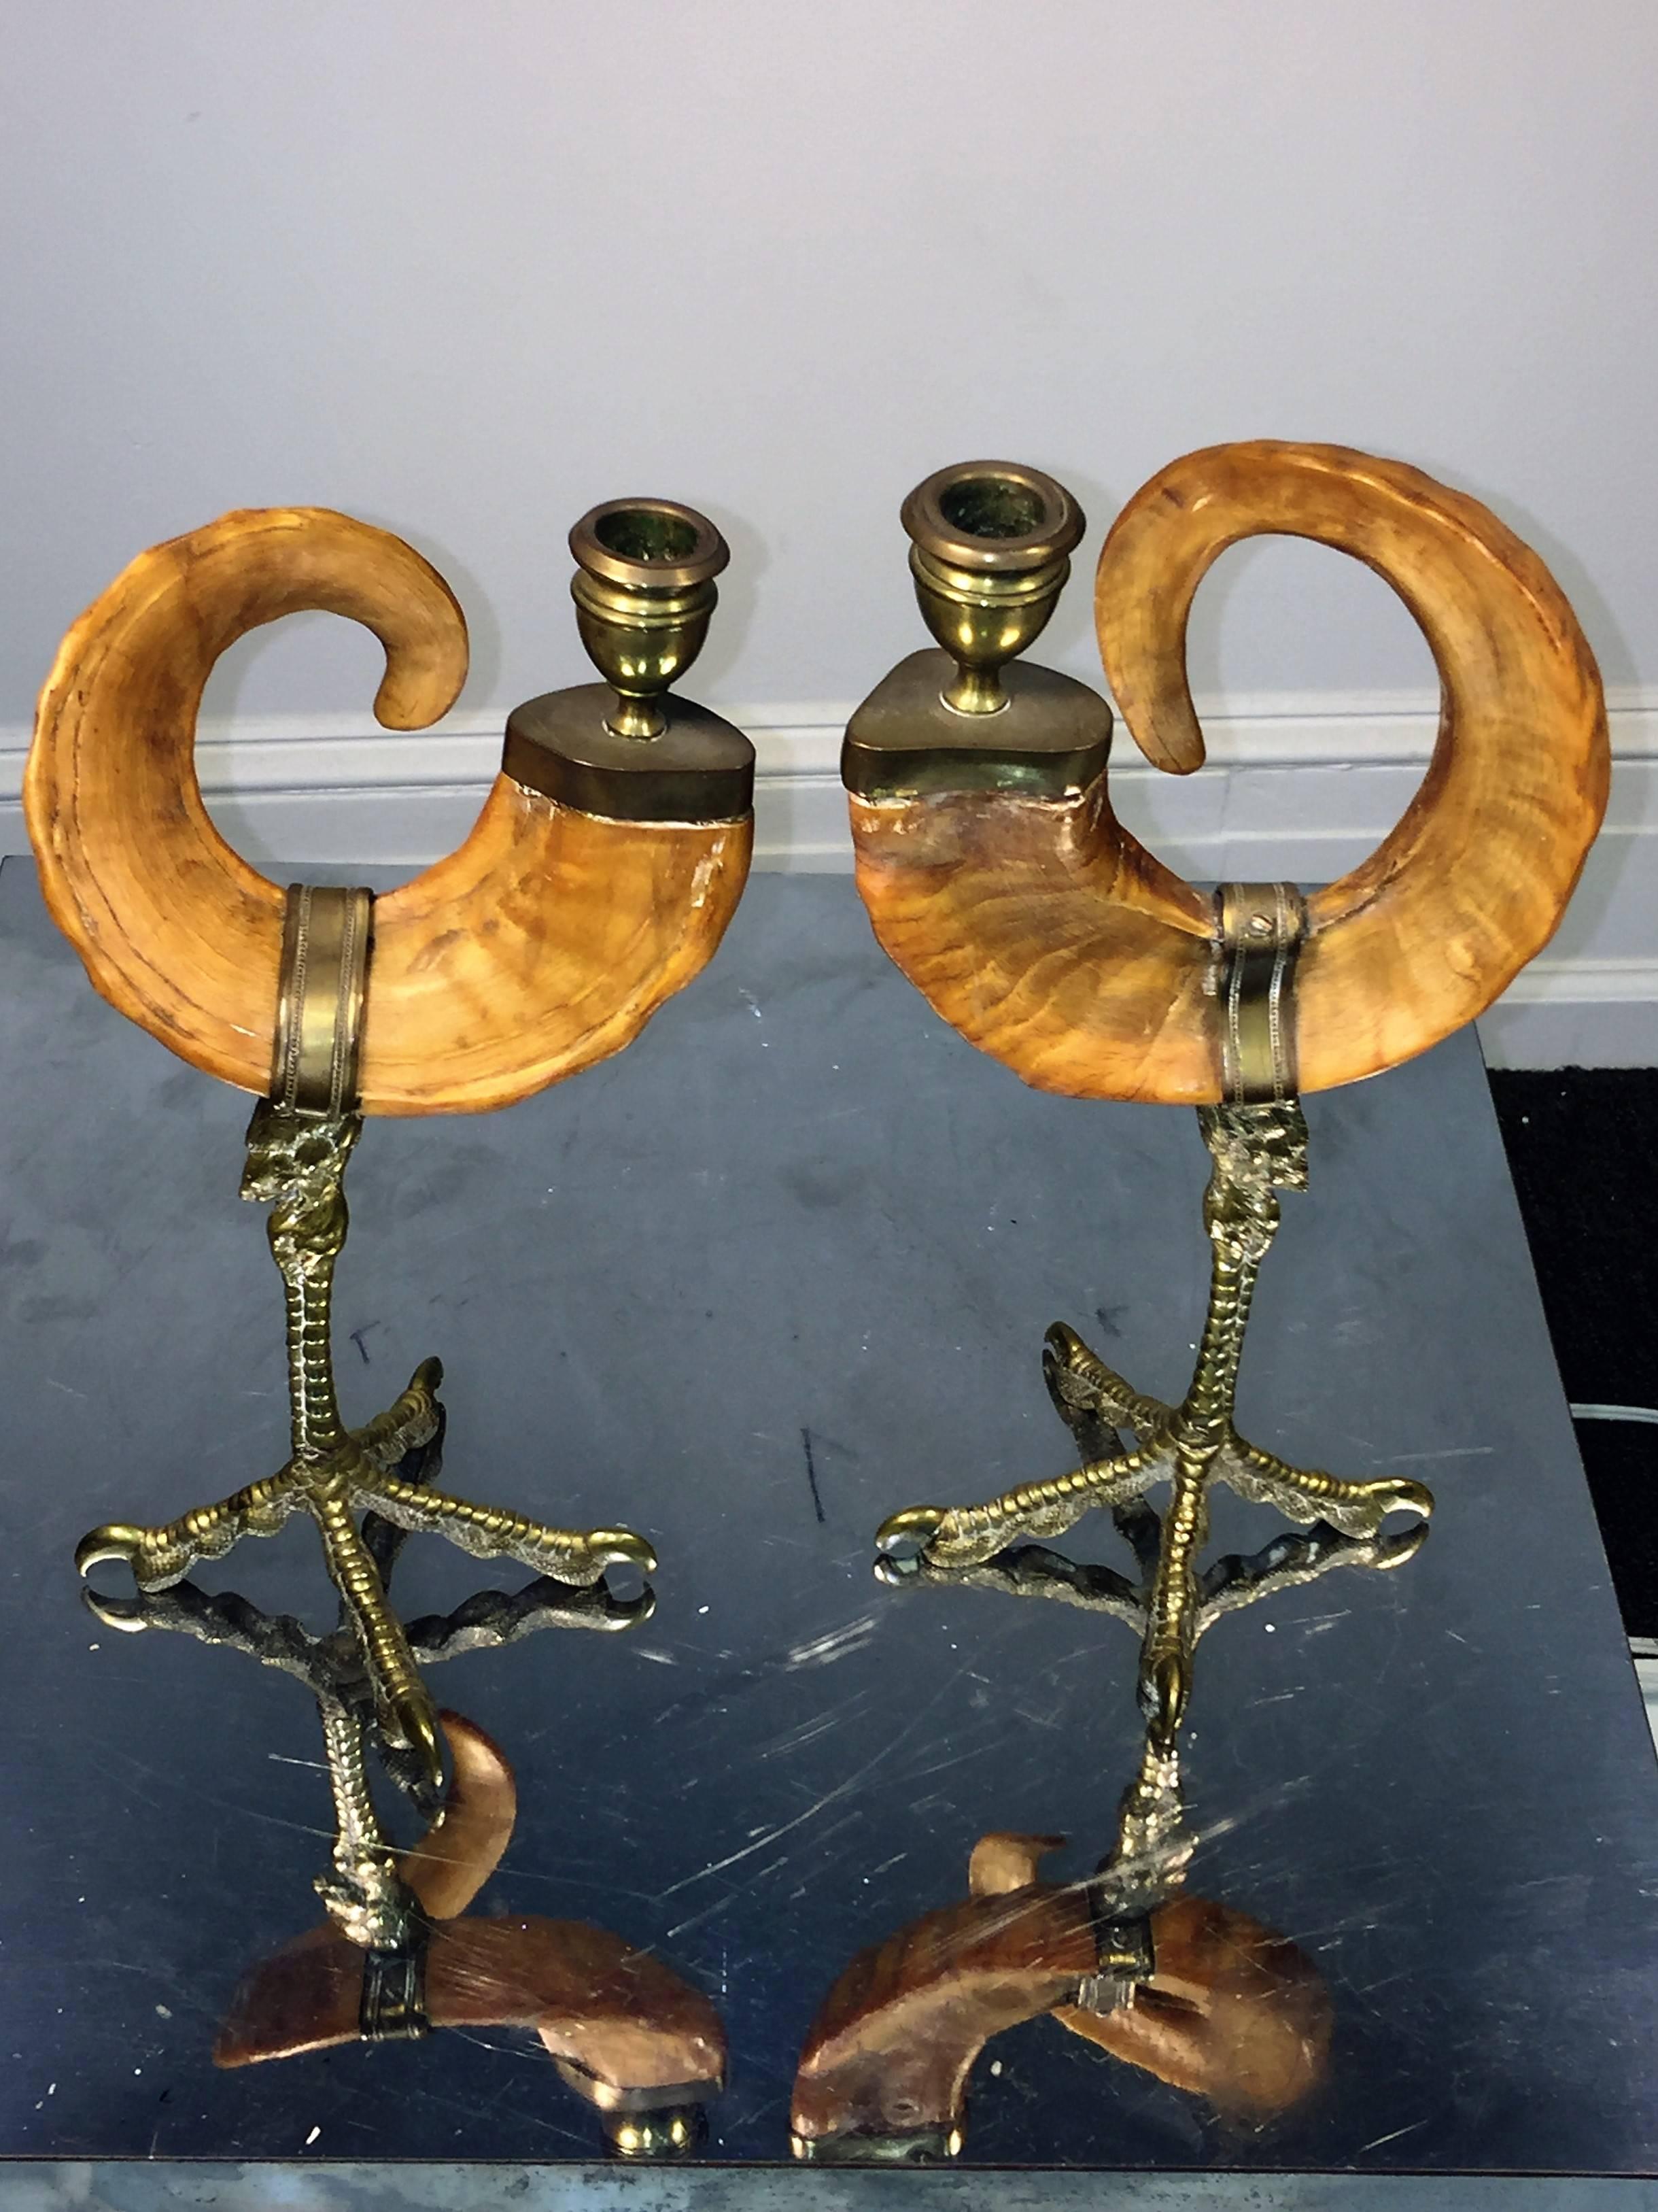 Interesting pair of brass and ram horn candlesticks formed to mimic a pair of fancy cockerels with the tail being the curved ram horn. These would look great on a fancy coffee table or console and would be nice for a candle lit dining table. The